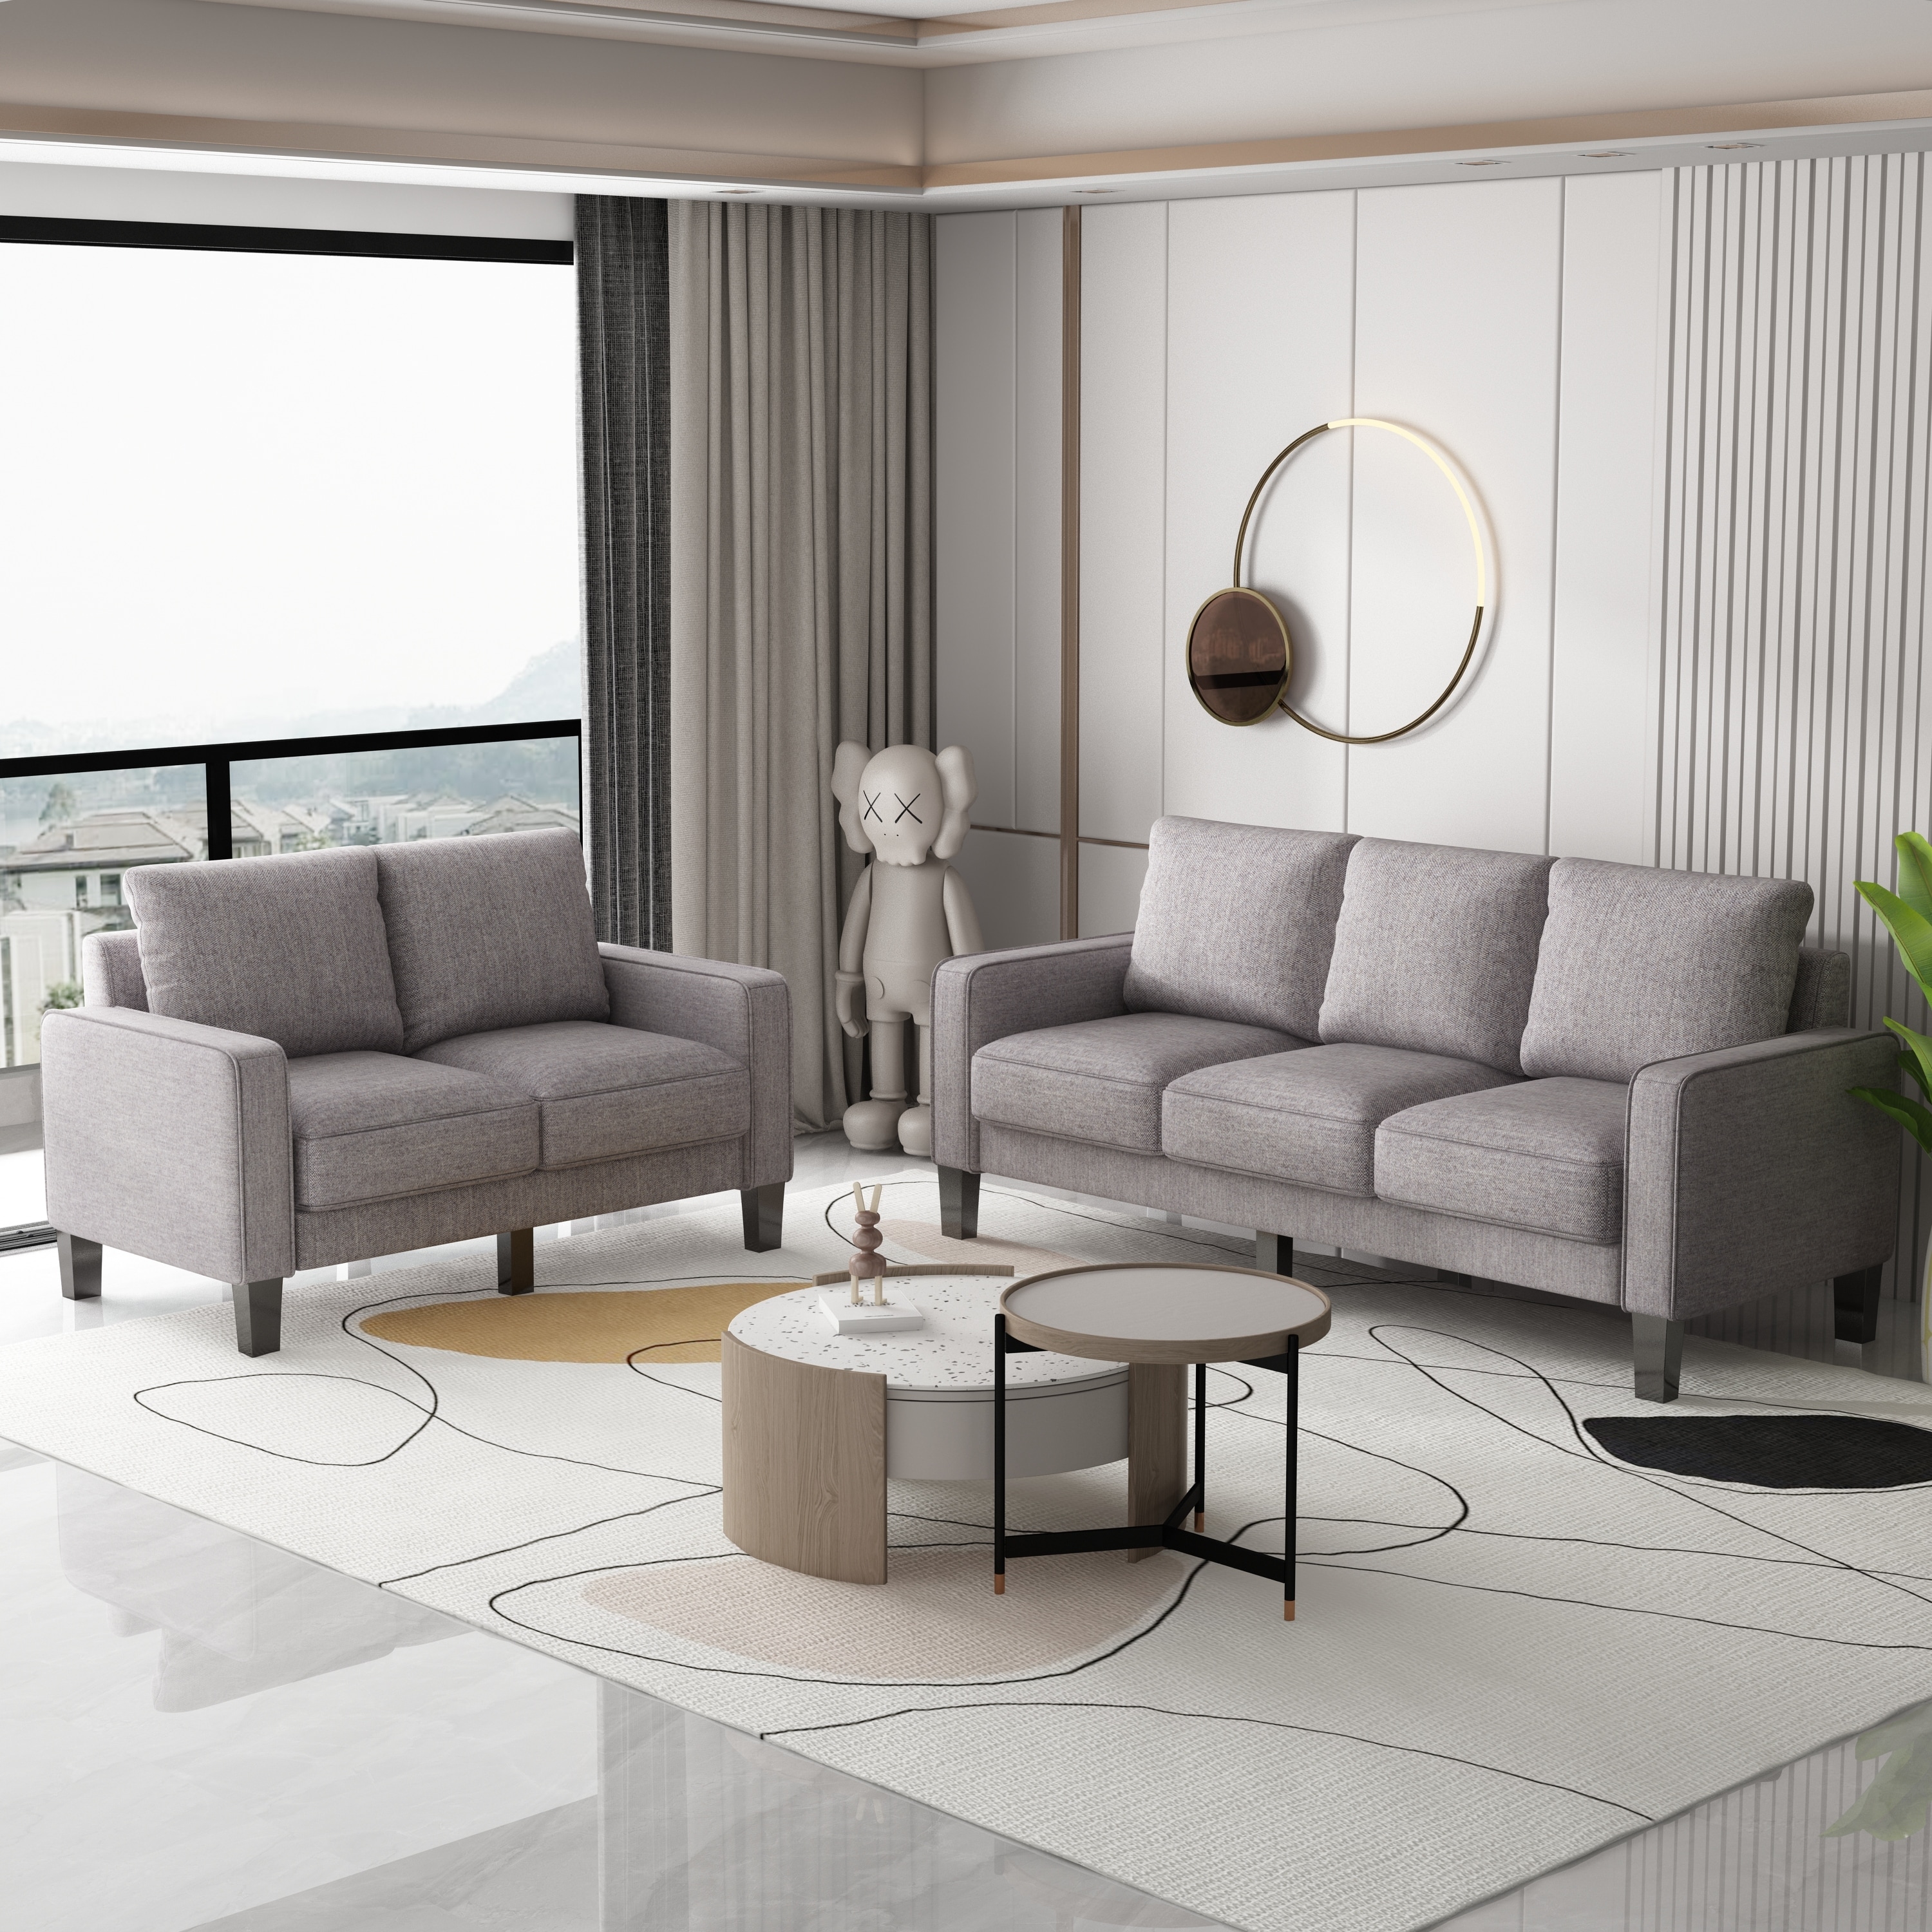 2 Pieces Nordic Style Sofa Set Living Room Sofa  Loveseat And 3 Seats Couch With Storage Design and Removable Cushions